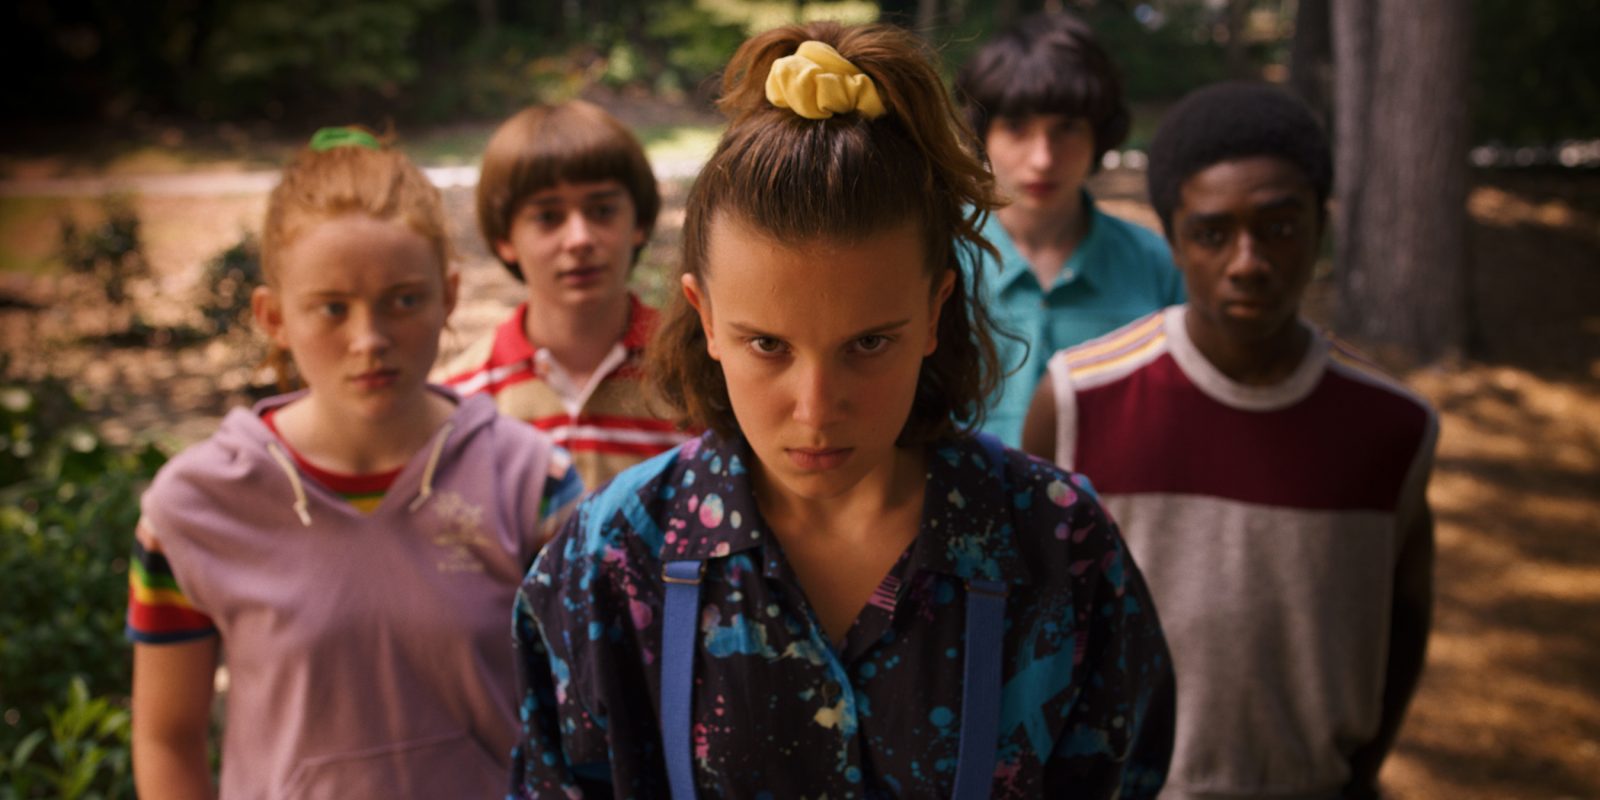 Anyone With the Most Basic TV Knowledge Should Get 12/15 on This Quiz Stranger Things